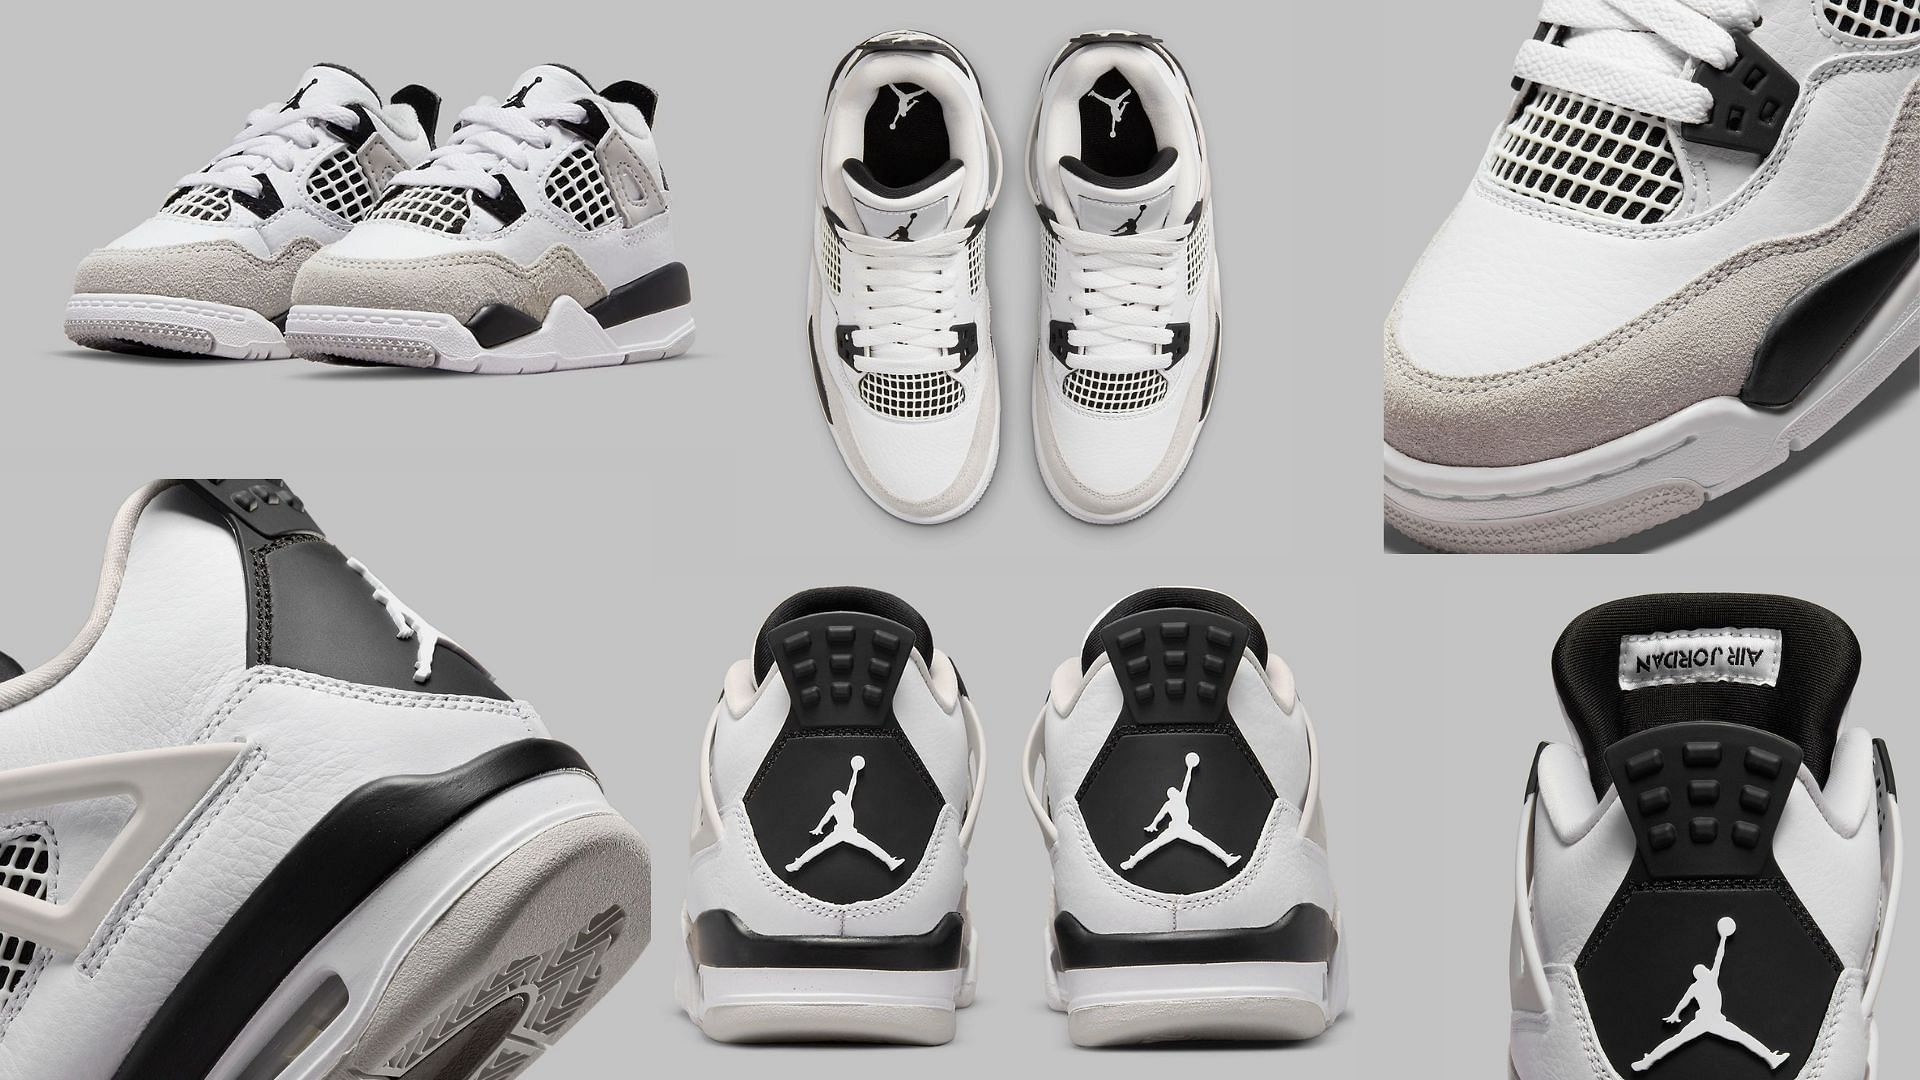 Air Jordan 4 &quot;Military Black&quot; shoes made with white, black, and gray (Image via Sportskeeda)